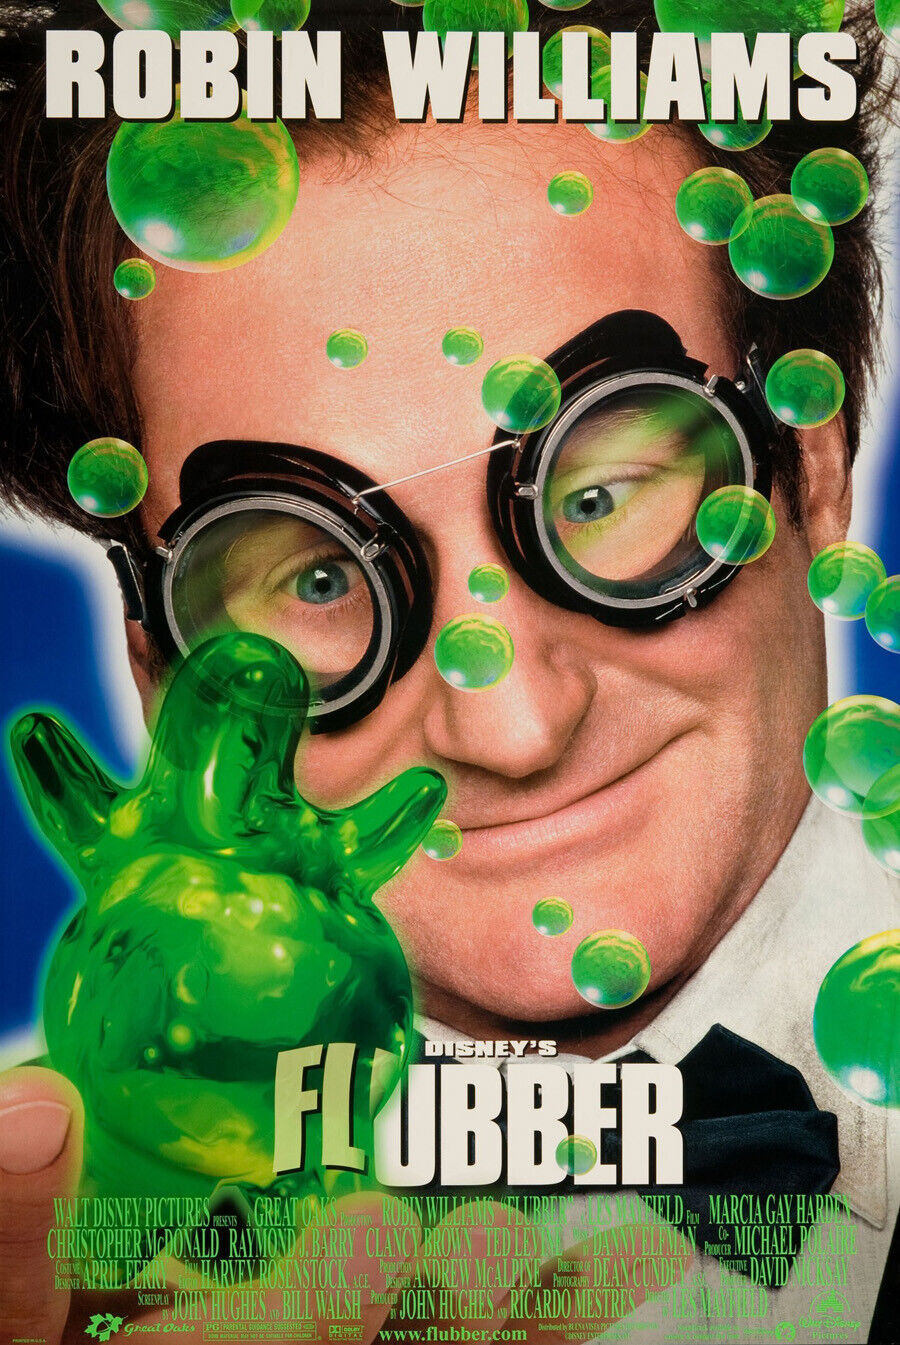 Flubber Movie Poster 2 Sided Original Final 27x40 Robin Williams